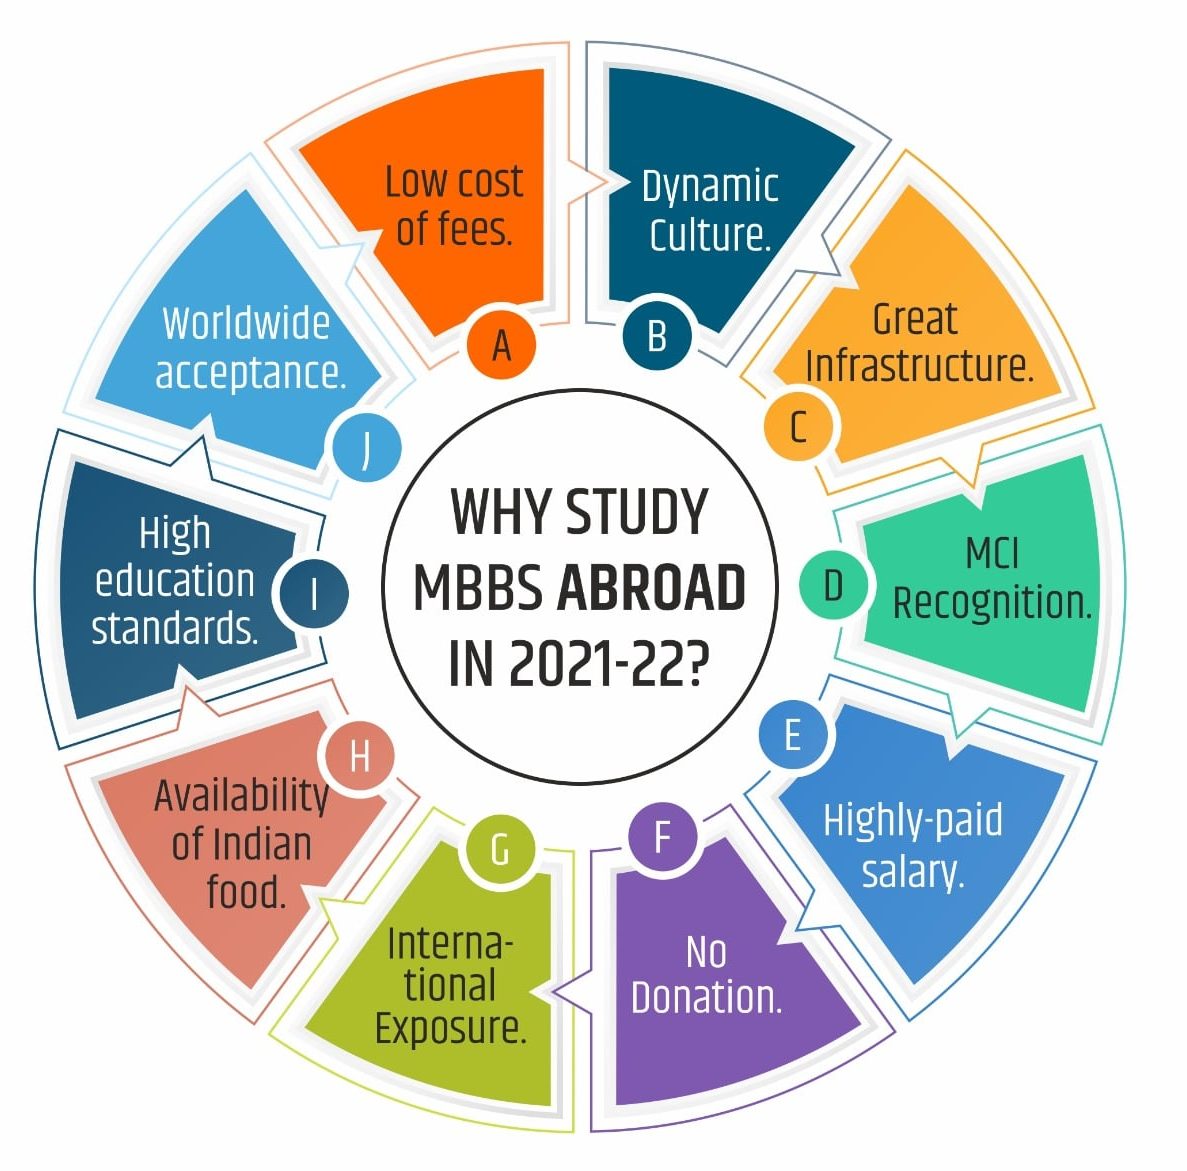 Why MBBS Abroad in 2021-22